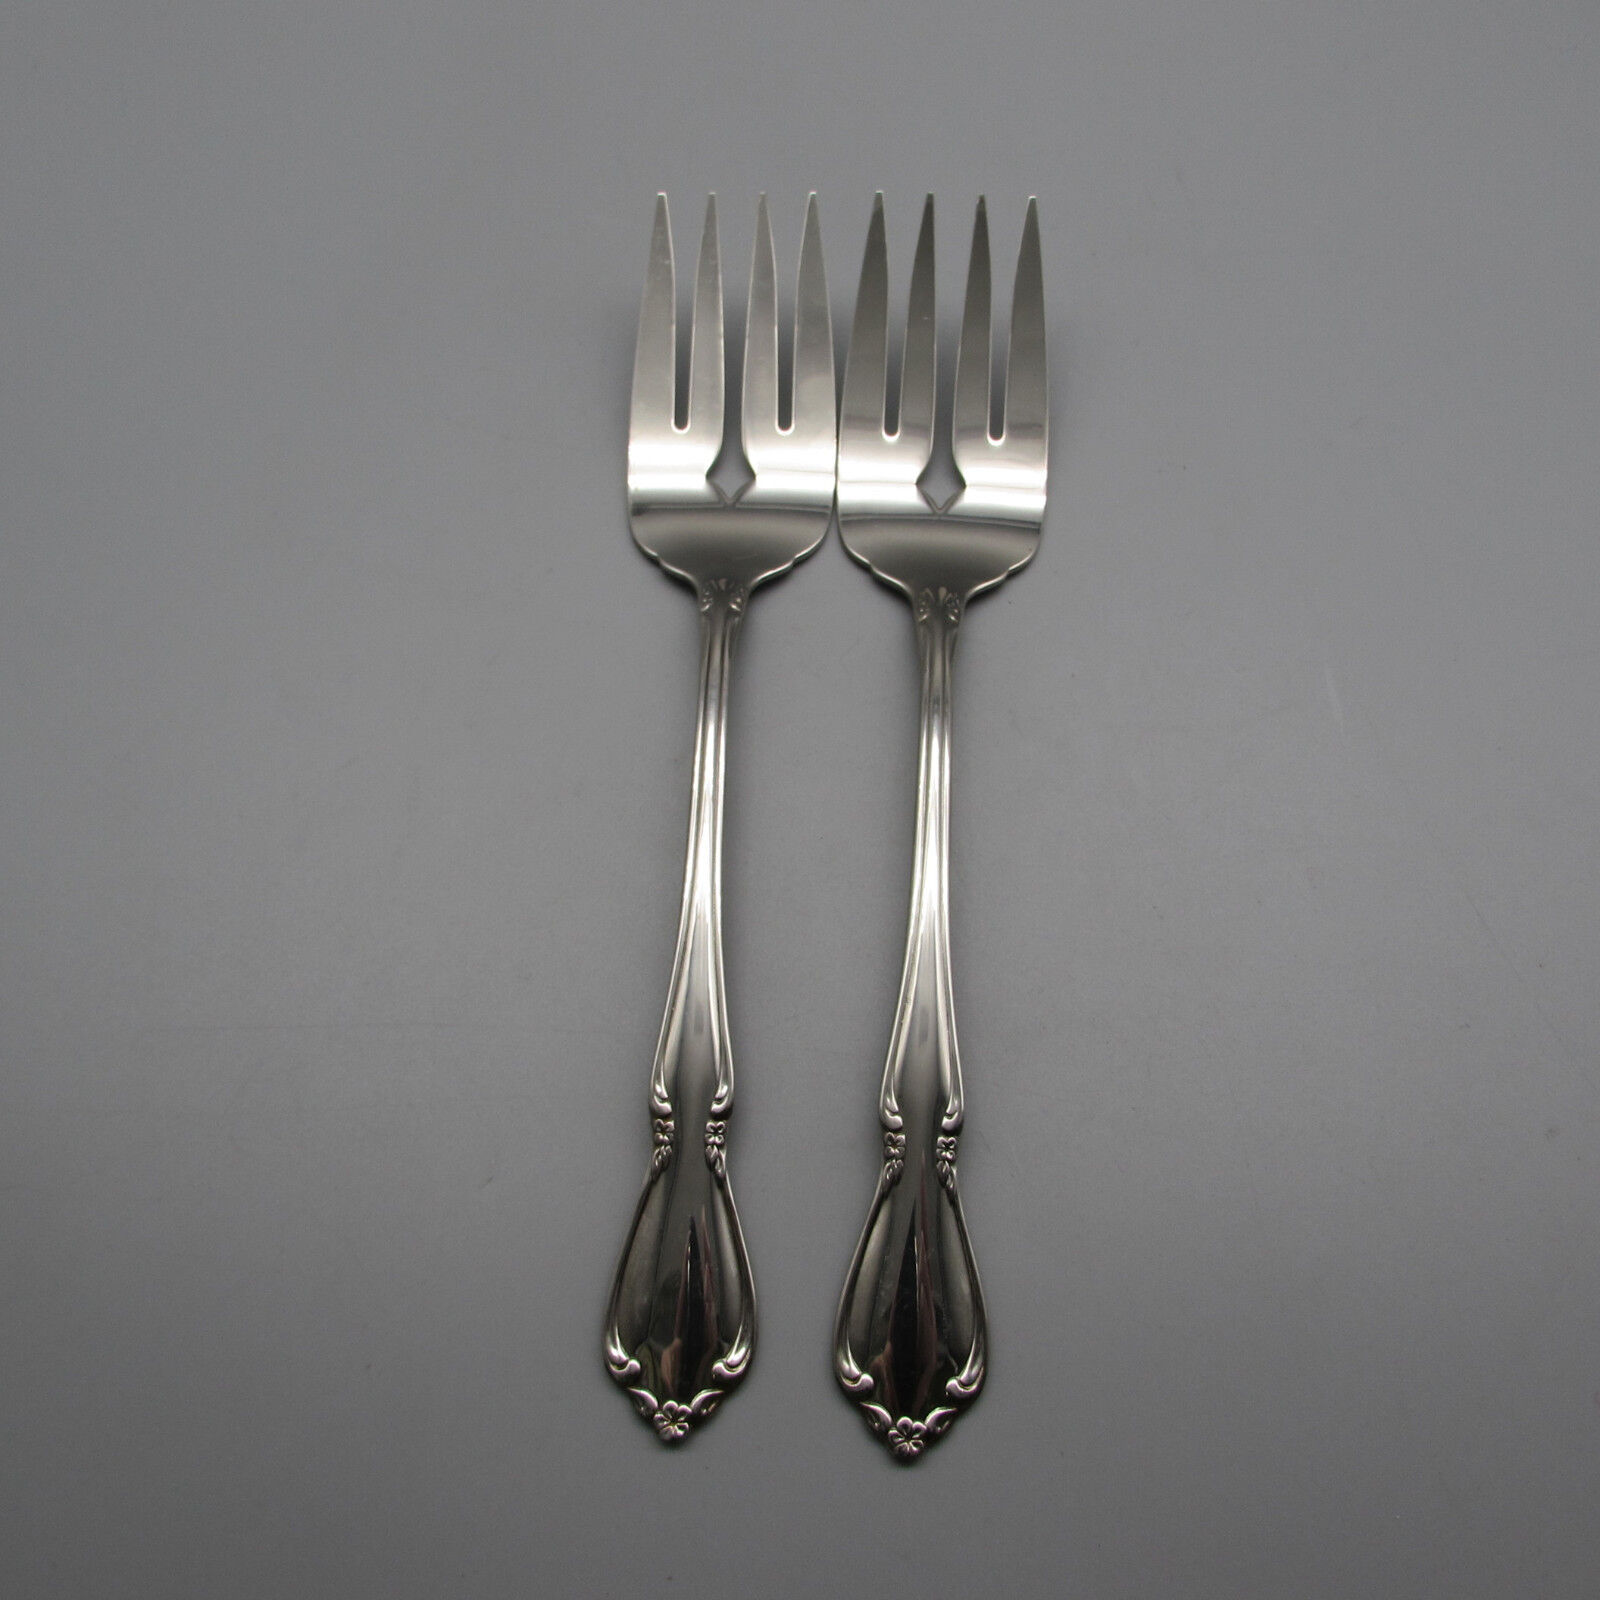 SET OF TWO - Oneida Stainless CHATEAU Serving Forks * USA